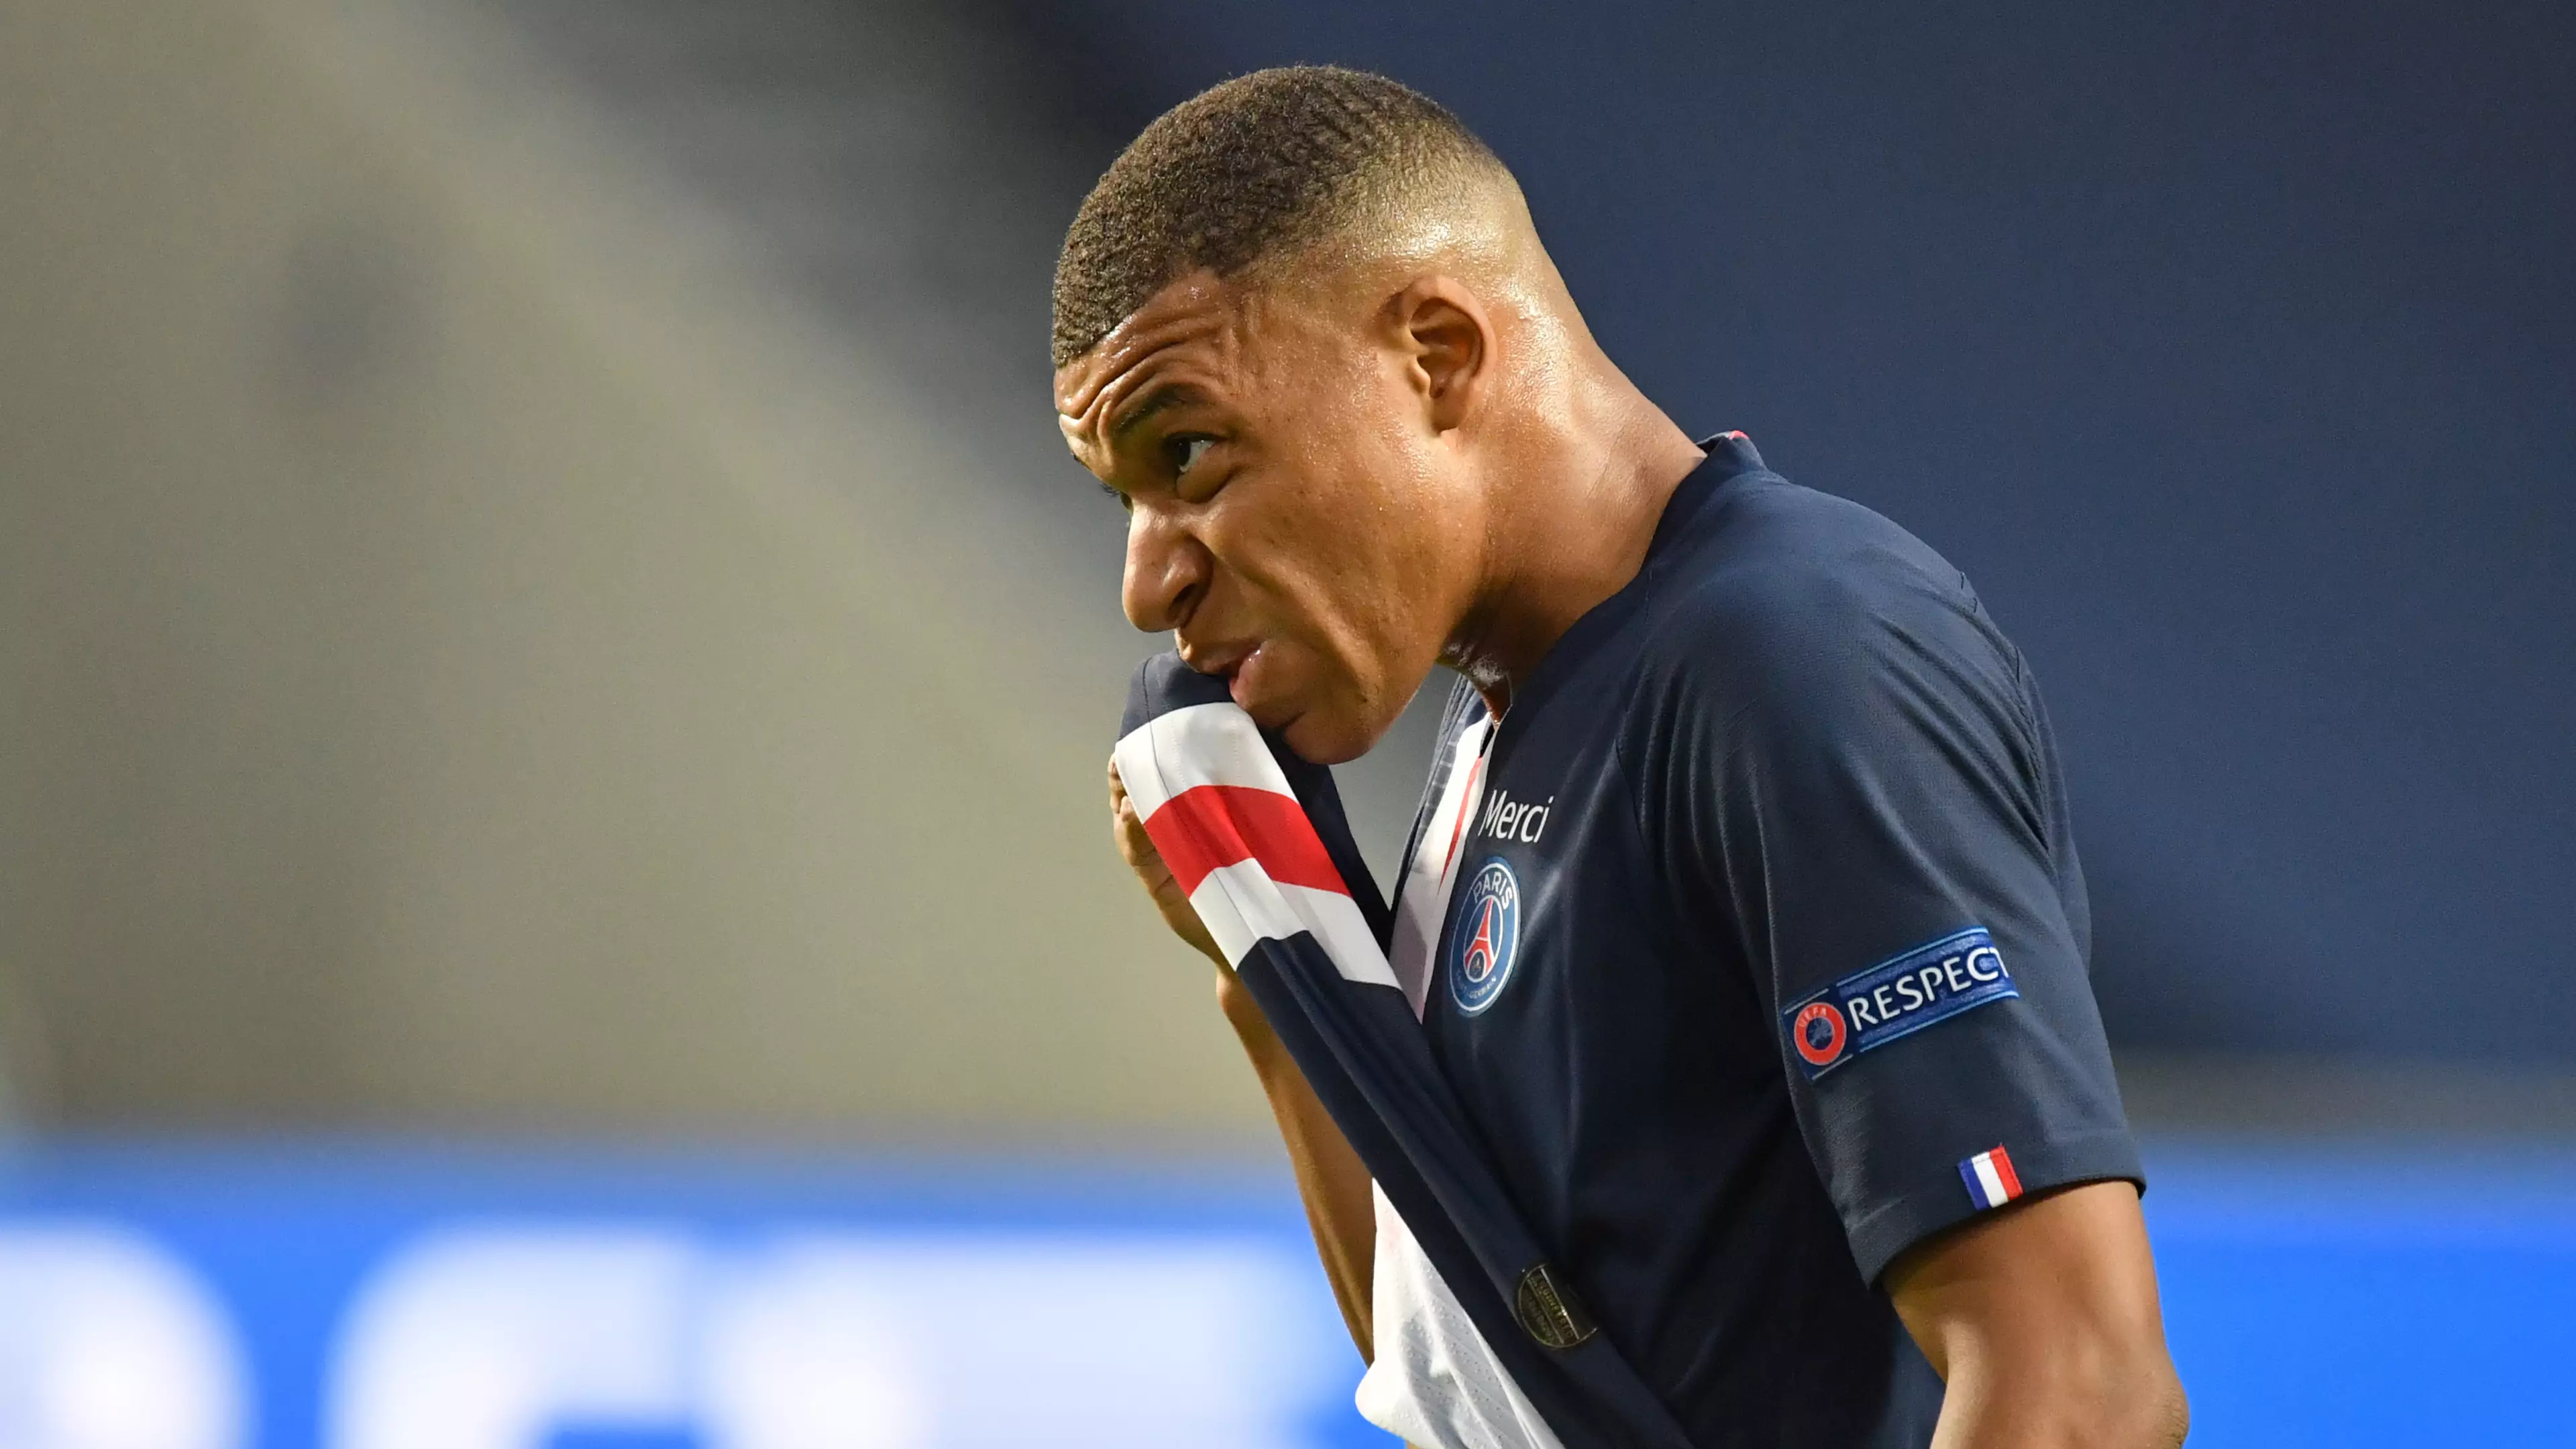 Kylian Mbappe 'Tells Paris Saint-Germain He Wants To Leave' At The End Of The Season